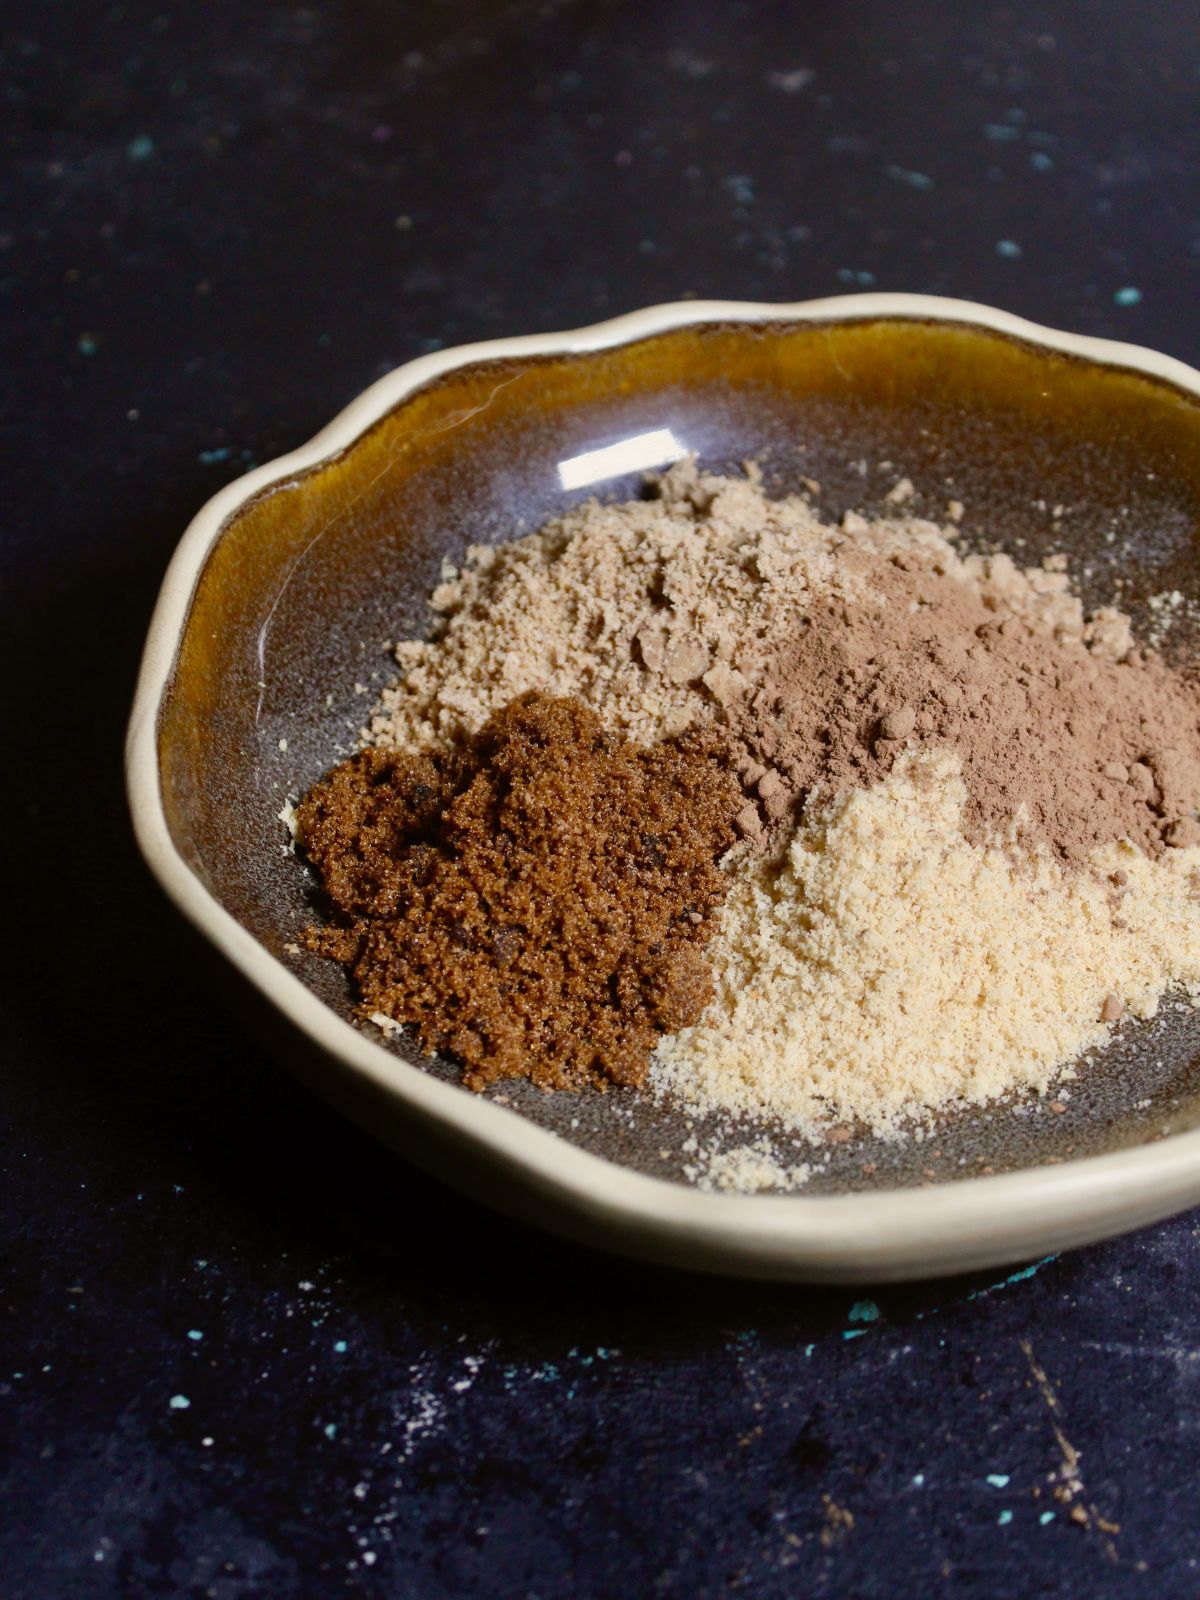 Add jaggery and other dry ingredients in a bowl